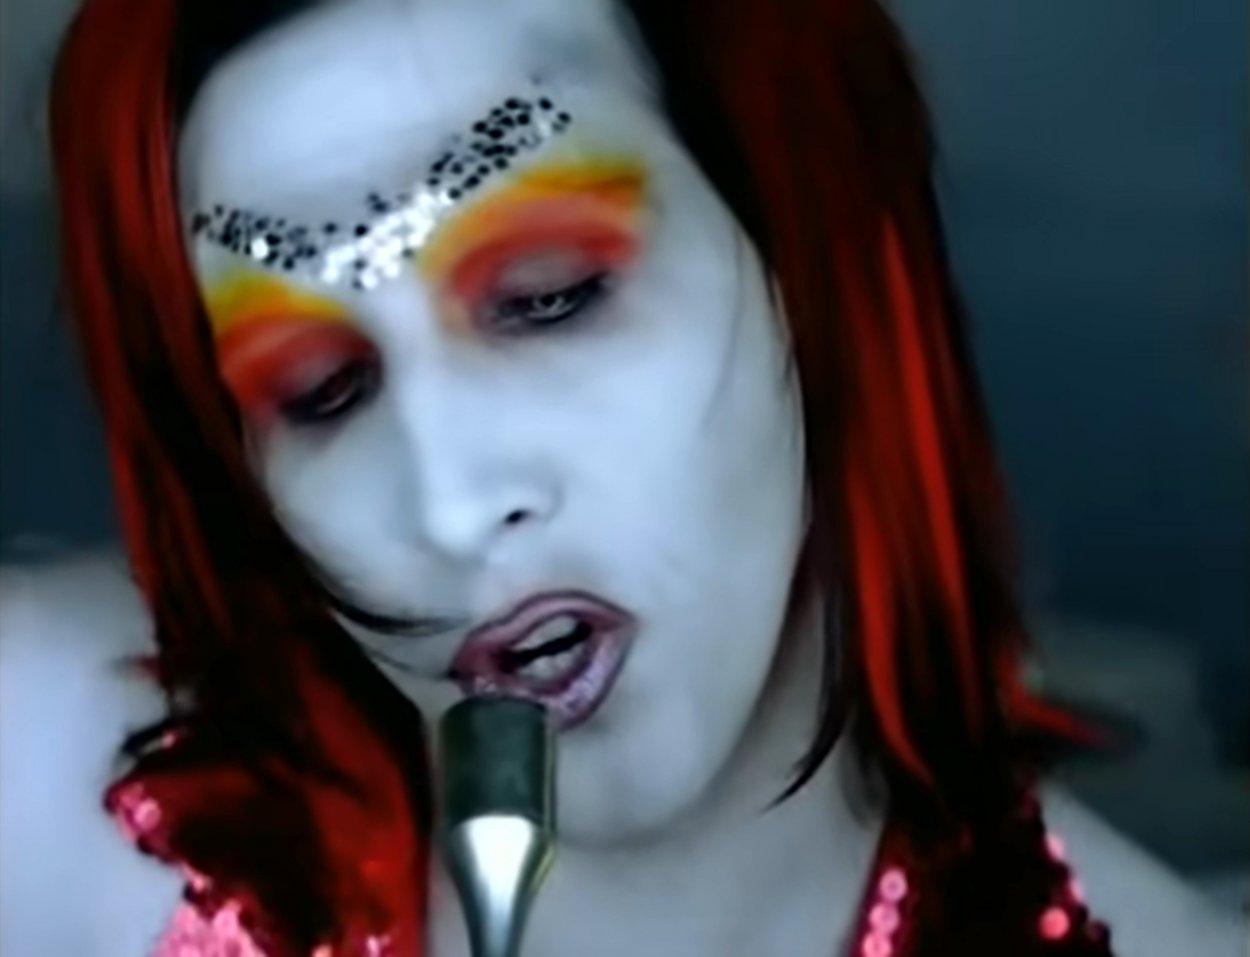 Marilyn Manson as an alien rock star singing in "The Dope Show" music video